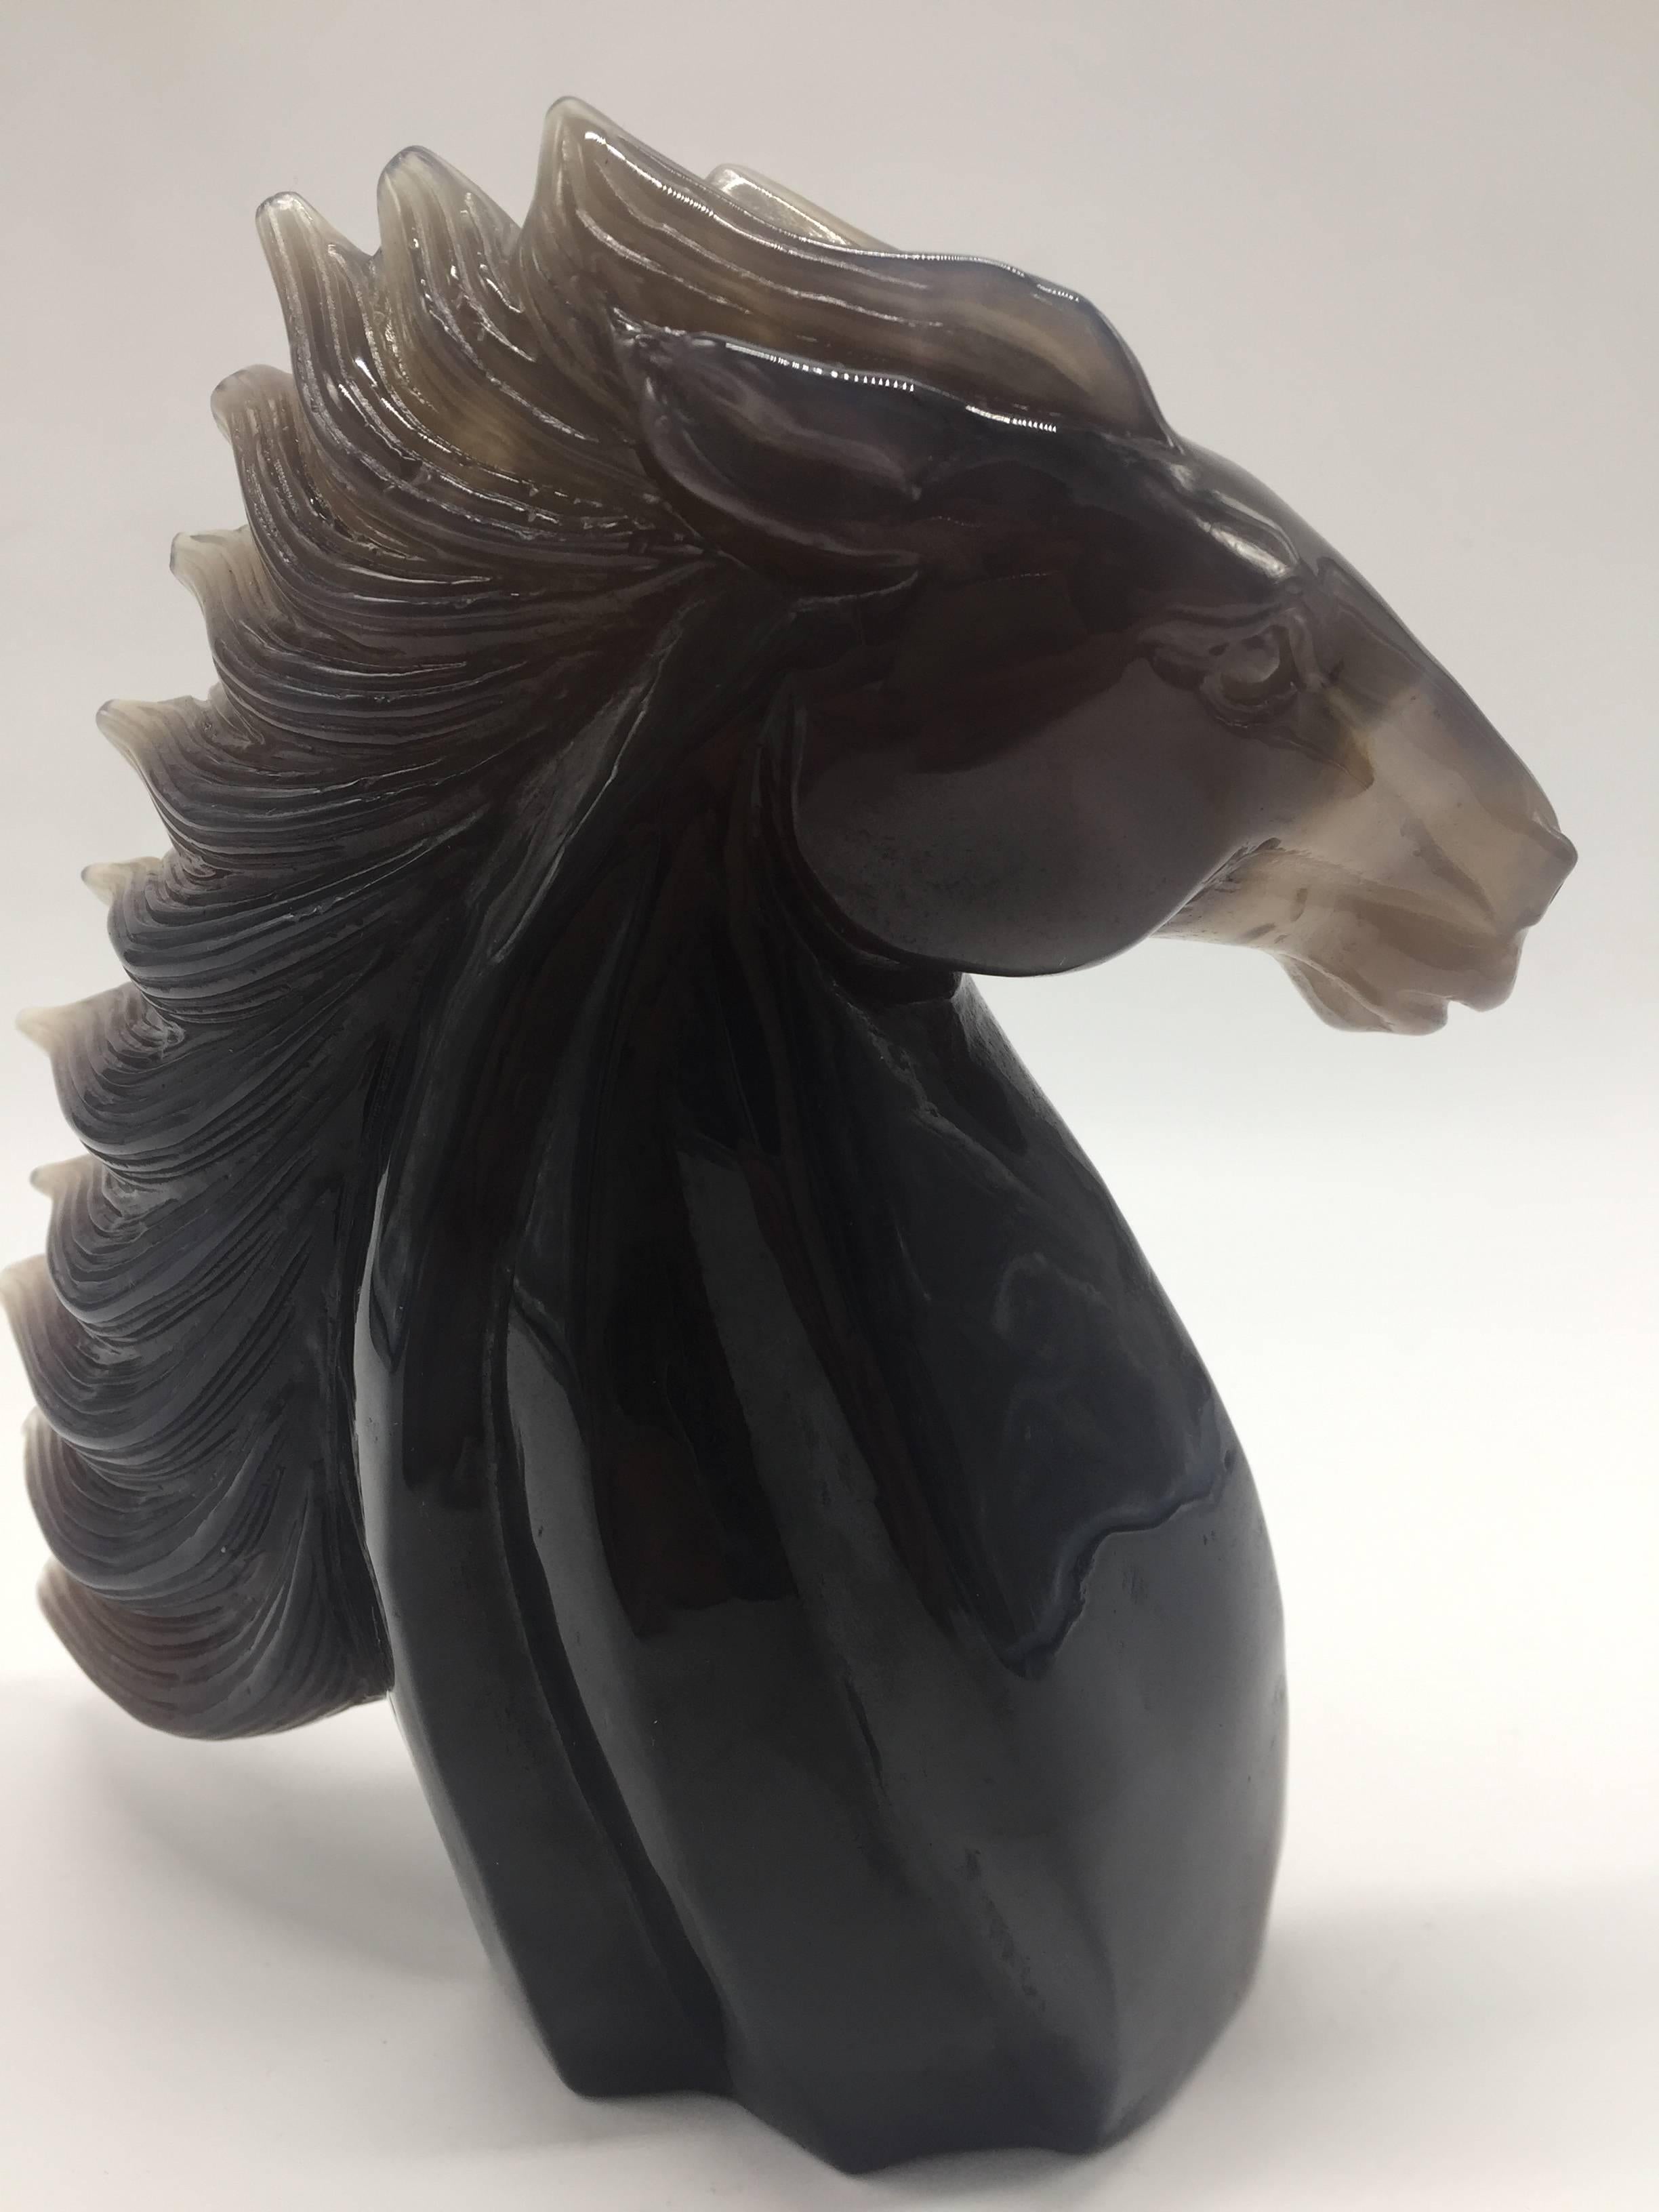 A beautiful all natural agate horse. 

This stunning sculpture is made of pure agate. The art piece preserved the original characters of the gem stone, showing the amazing crystal Formations. The horse is beautifully carved with vivid expressions